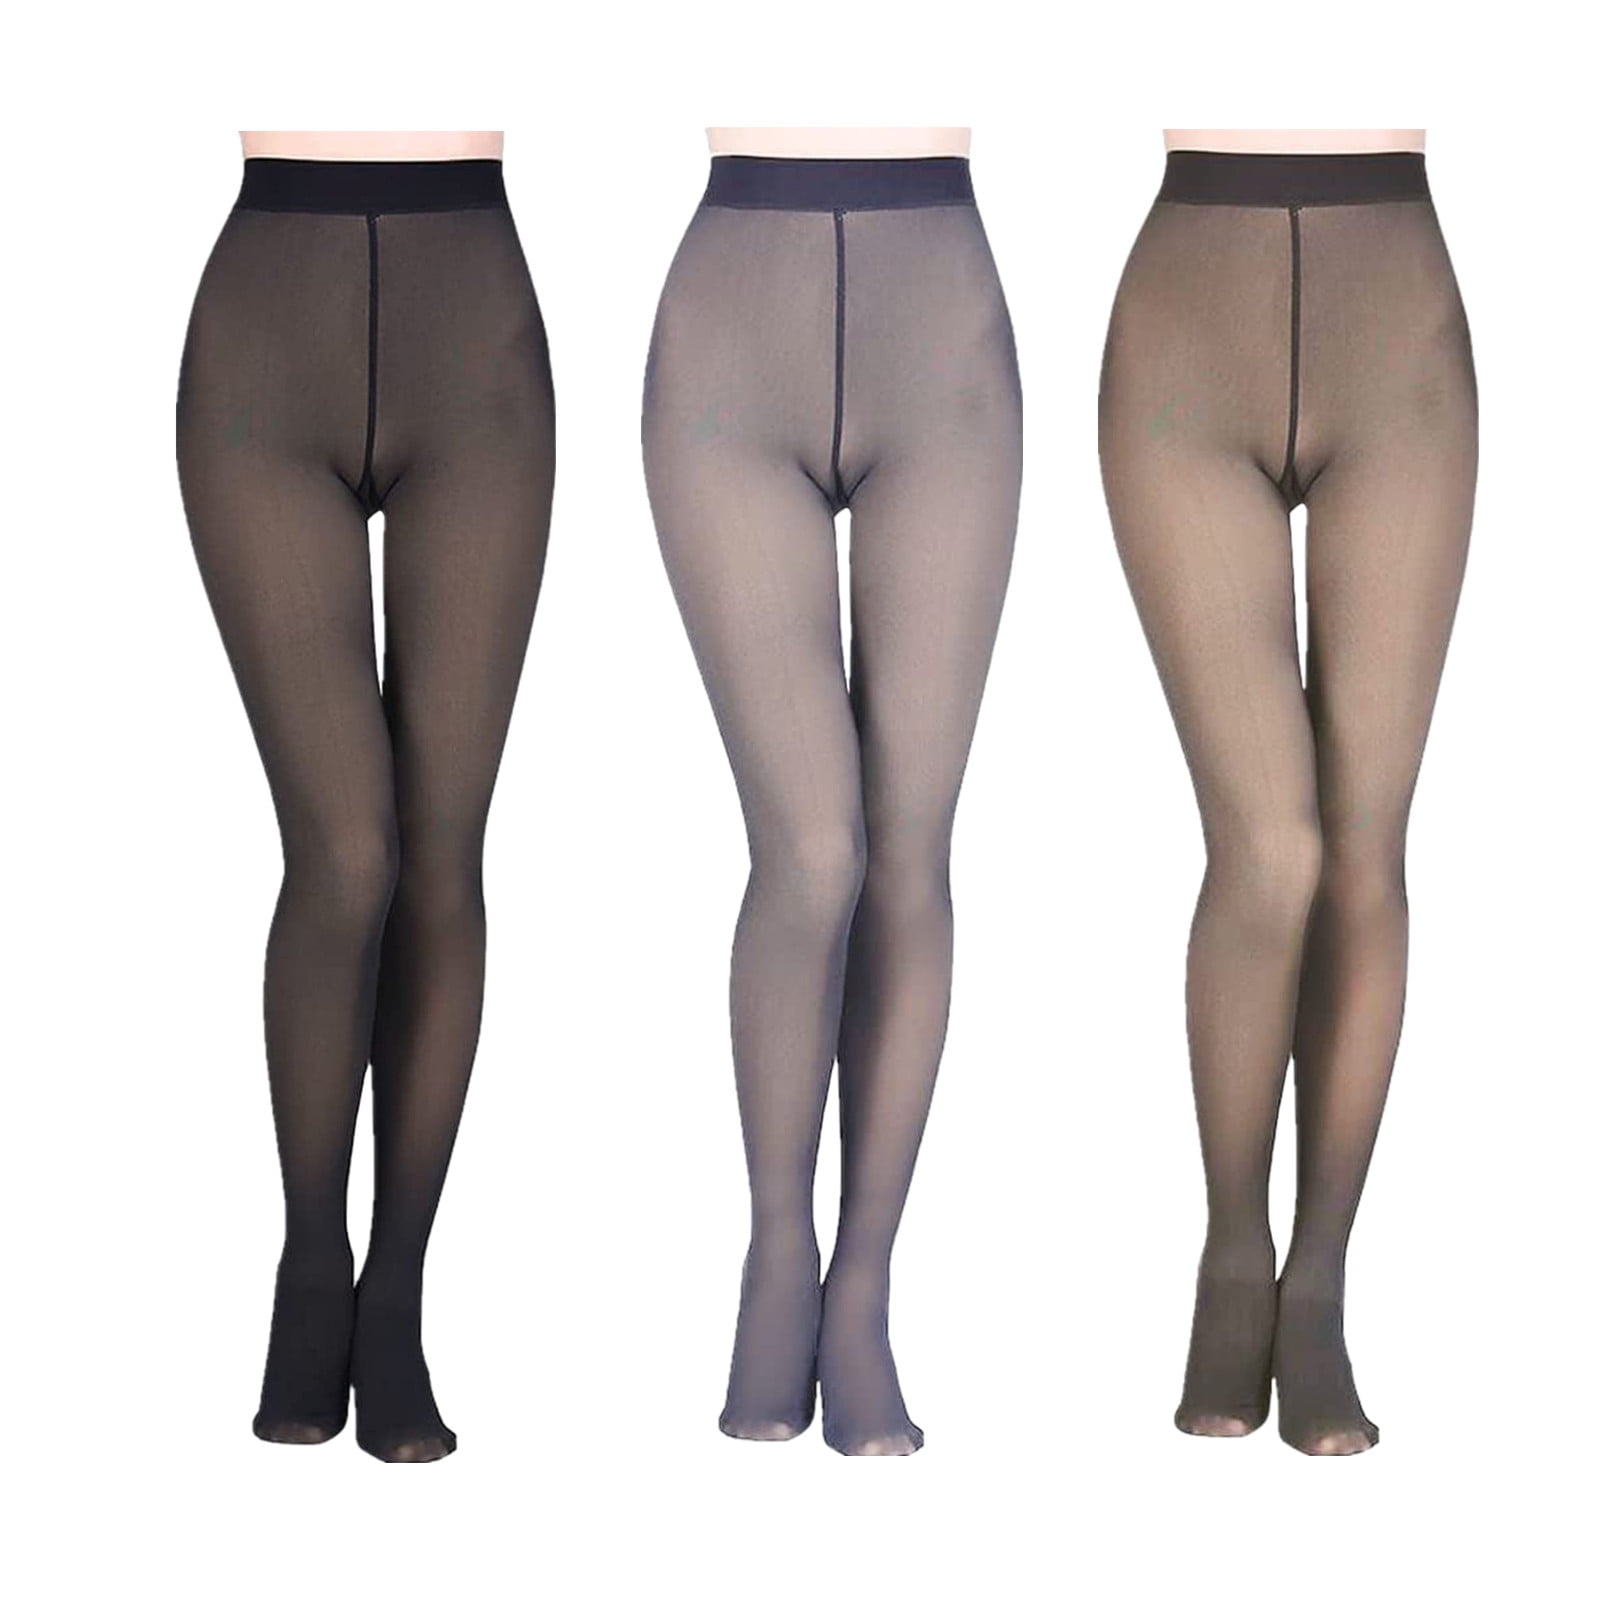 BEAUTIFUL Fleece Lined Tights Women Leggings Thermal Pantyhose Fake  Translucent Tights Opaque High Waisted Winter Warm Sheer Tight Pack of 1  Free Size